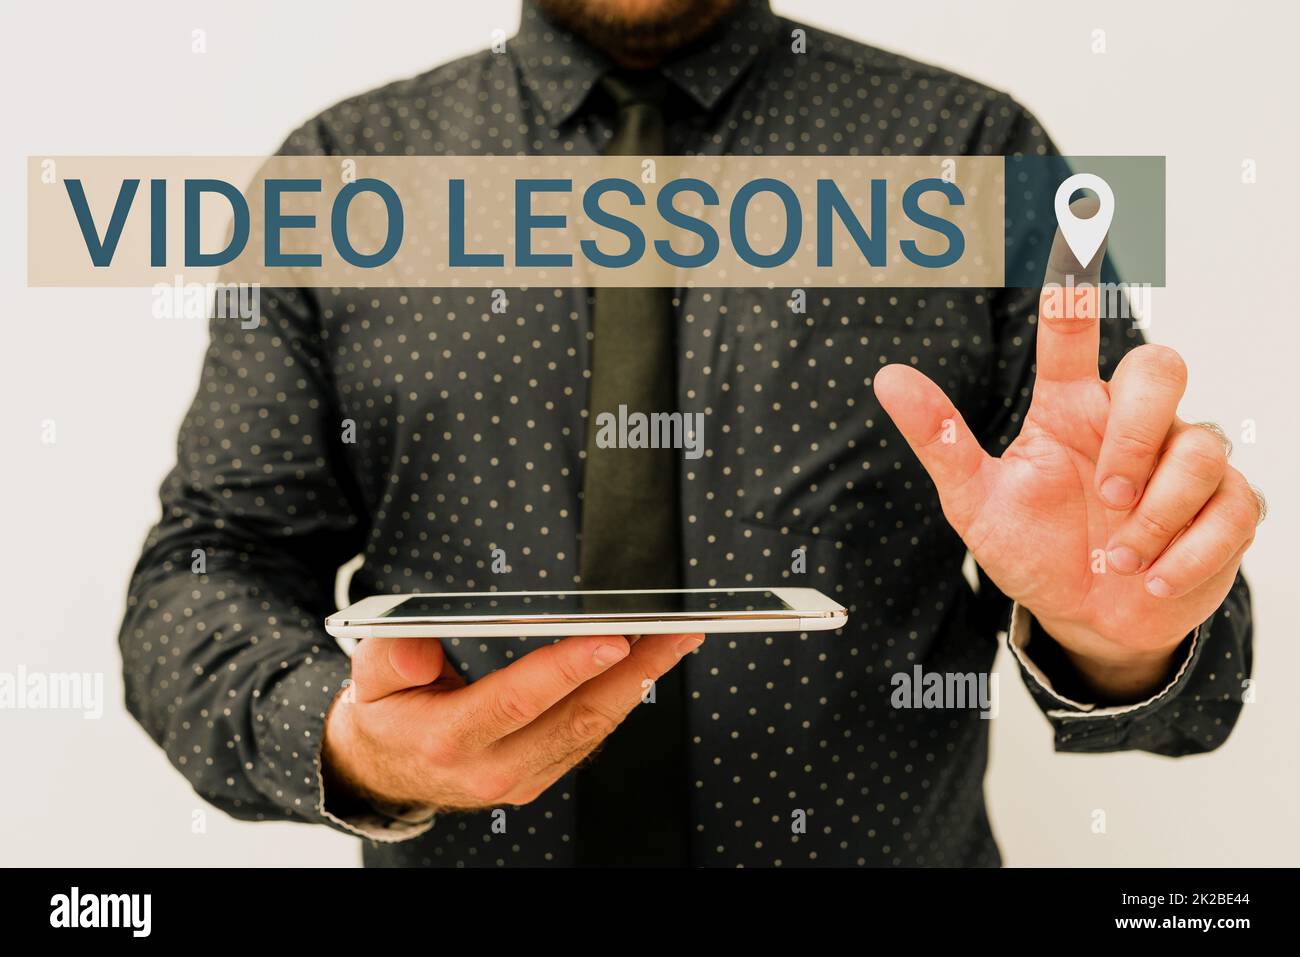 Conceptual caption Video Lessons. Business concept Online Education material for a topic Viewing and learning Presenting New Technology Ideas Discussing Technological Improvement Stock Photo